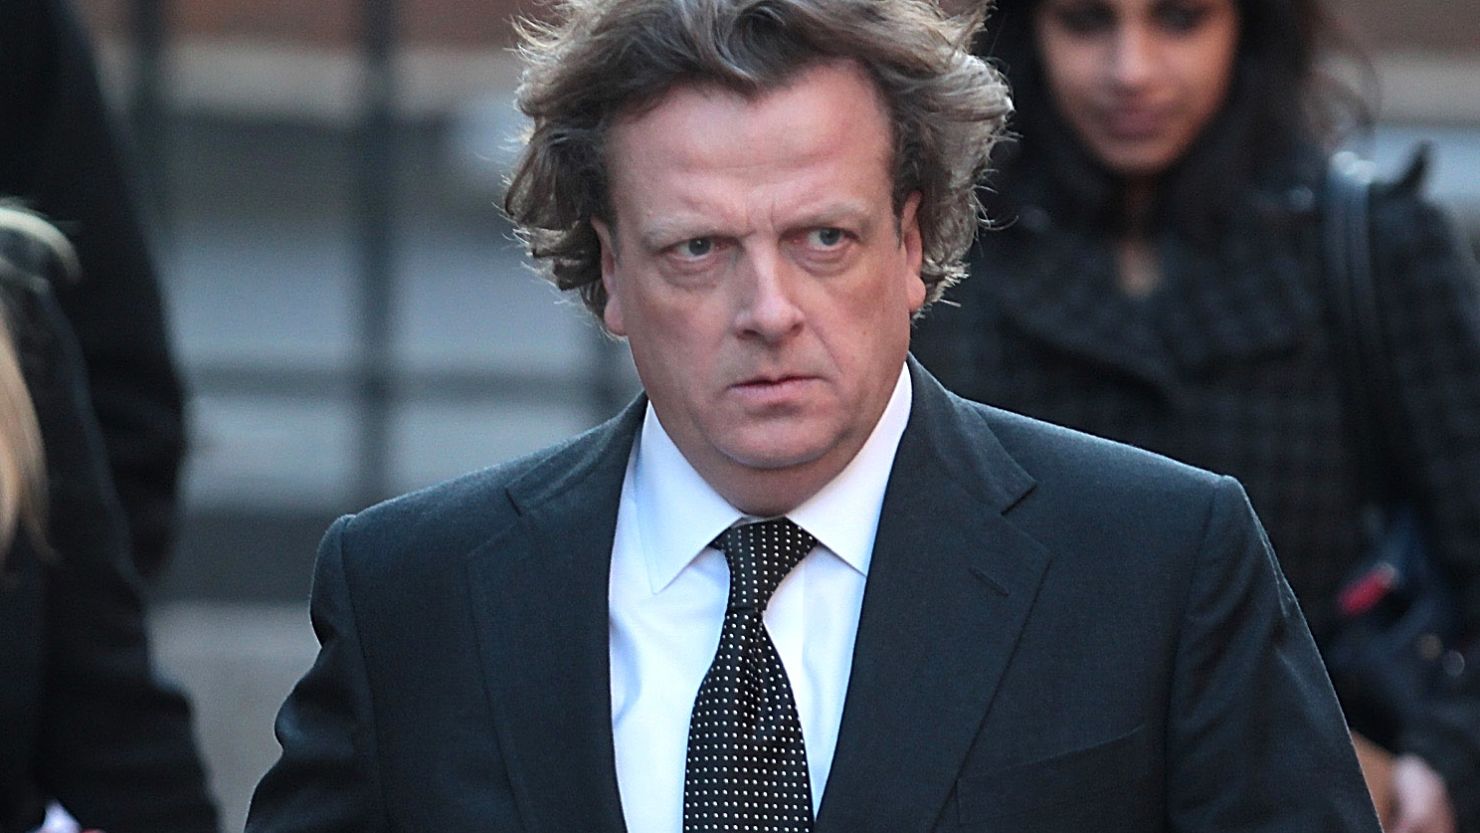 Richard Wallace, editor of The Daily Mirror, arrives at court in London on Monday.